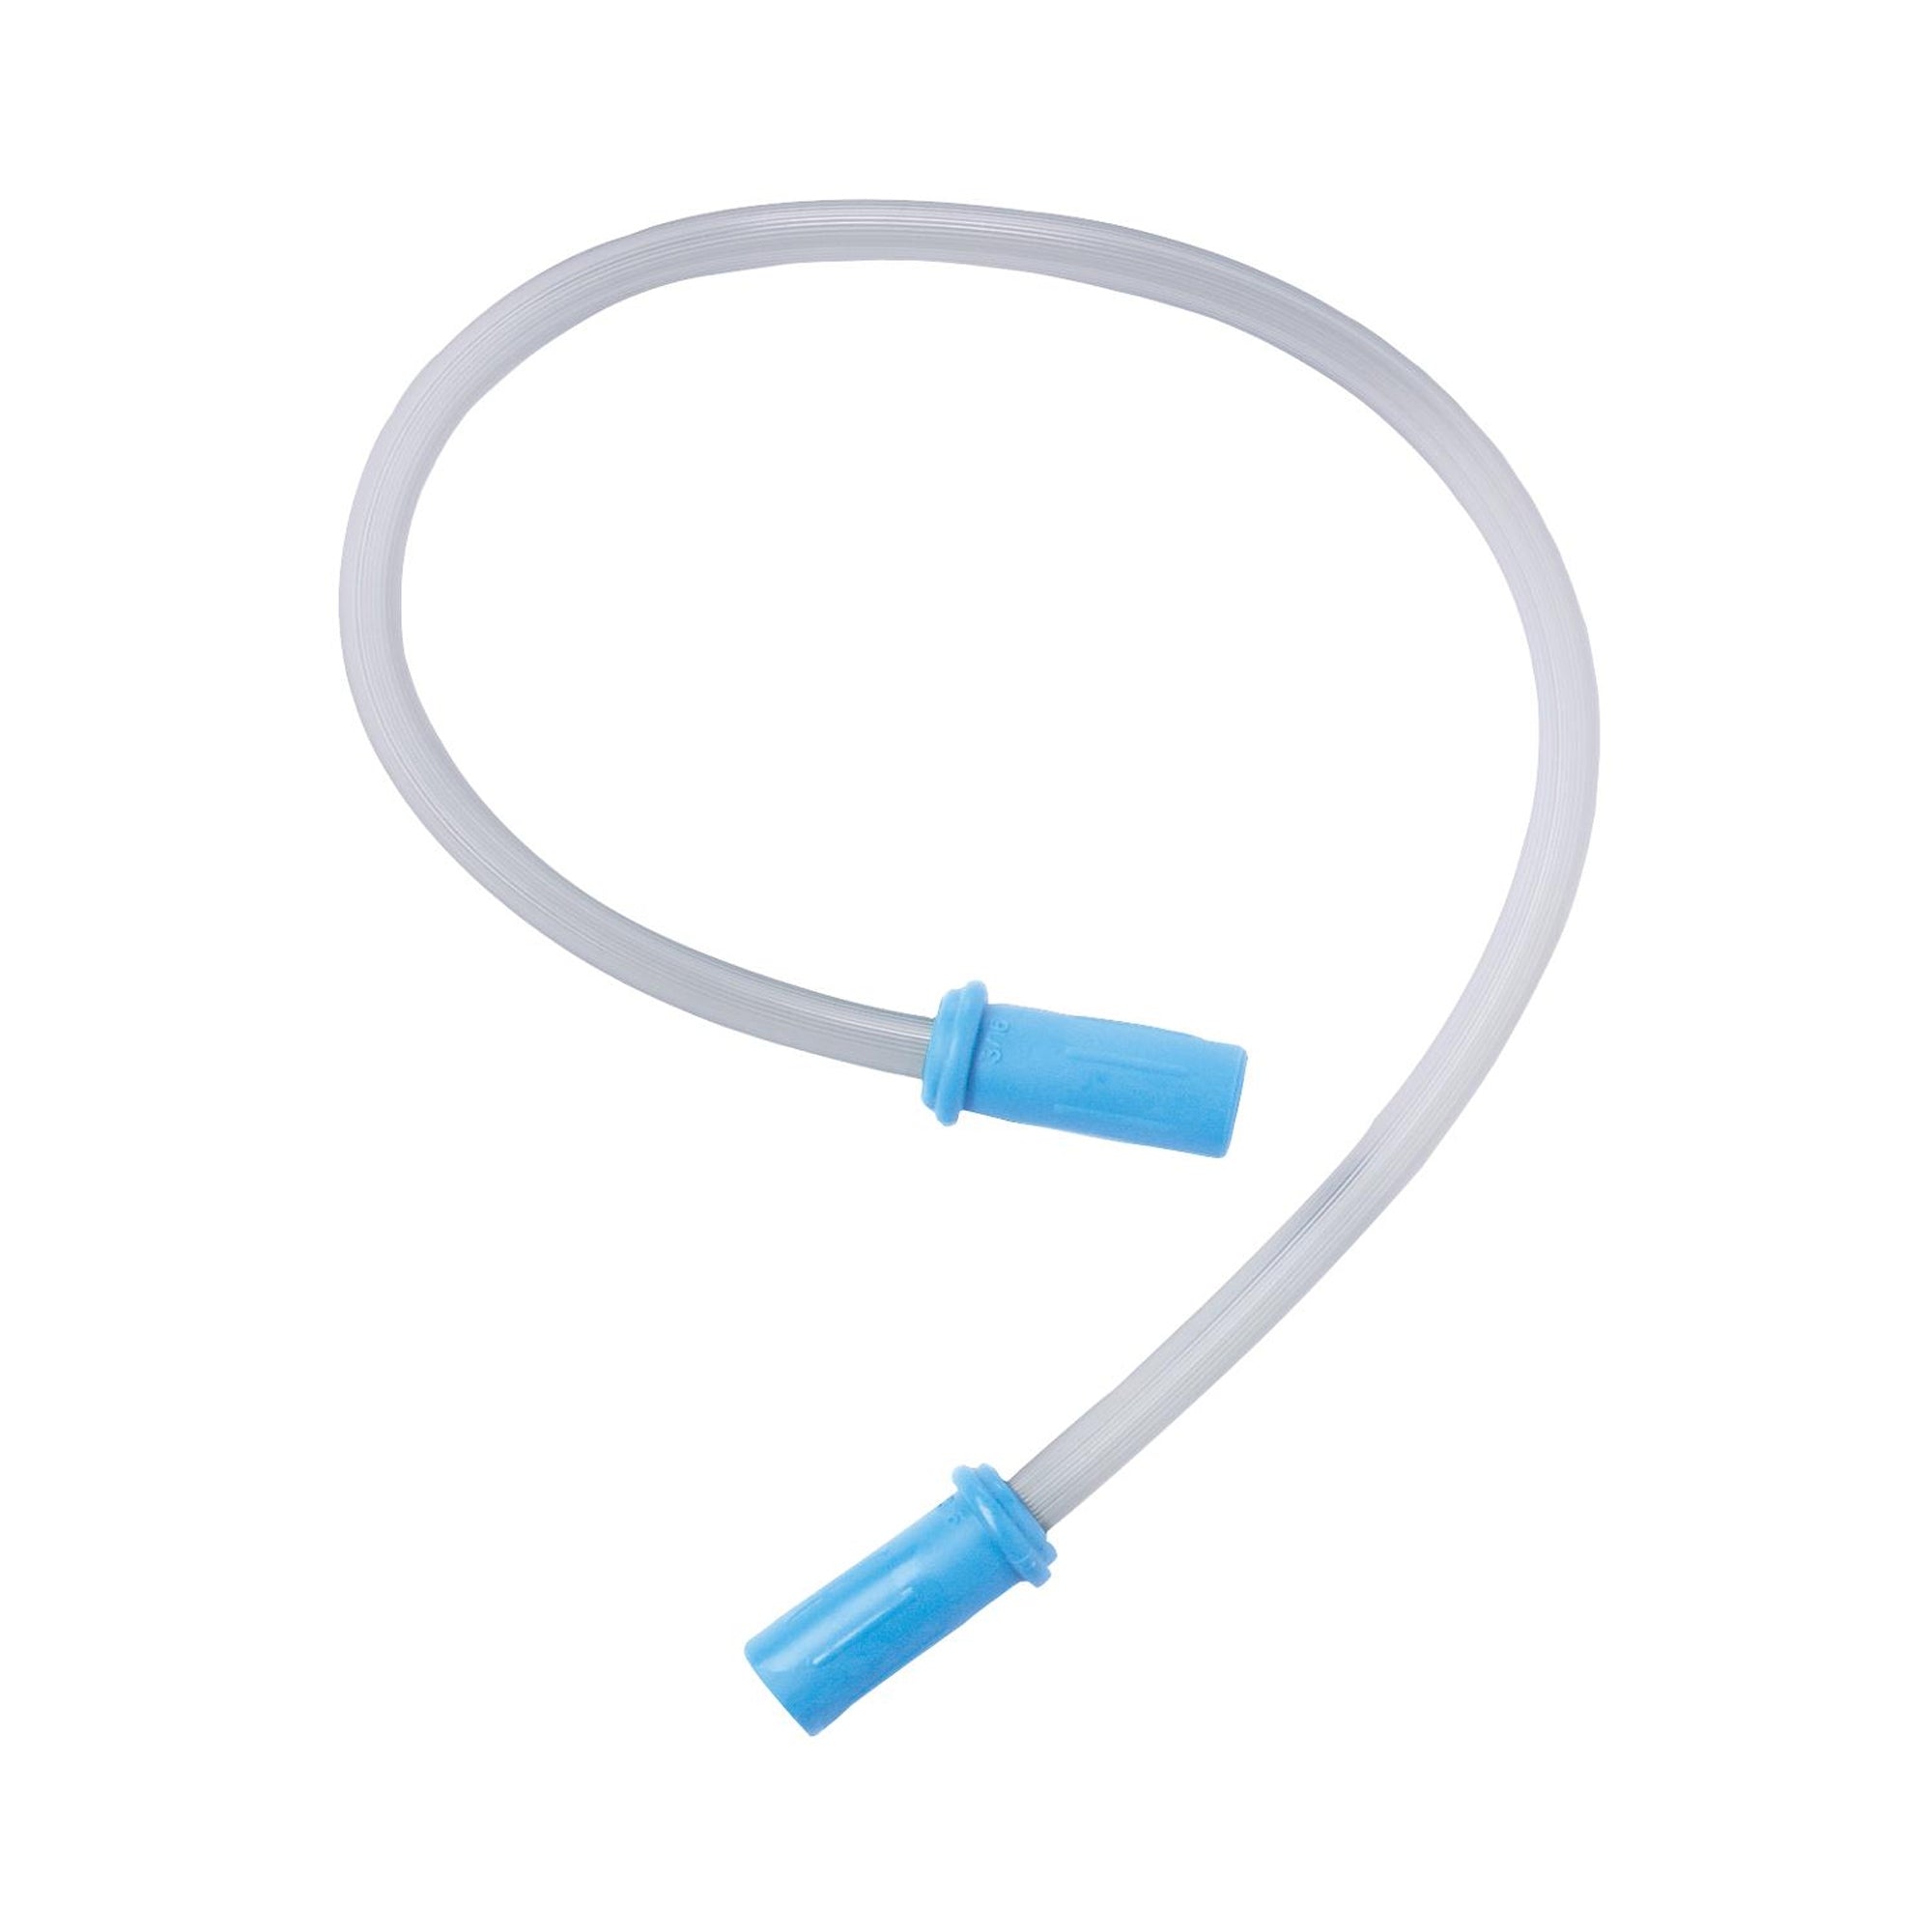 Medline Suction Connector Tubing - 20 Inch Length, 0.188 Inch I.D., Sterile Universal Female Connector, Clear PVC (50/CS)